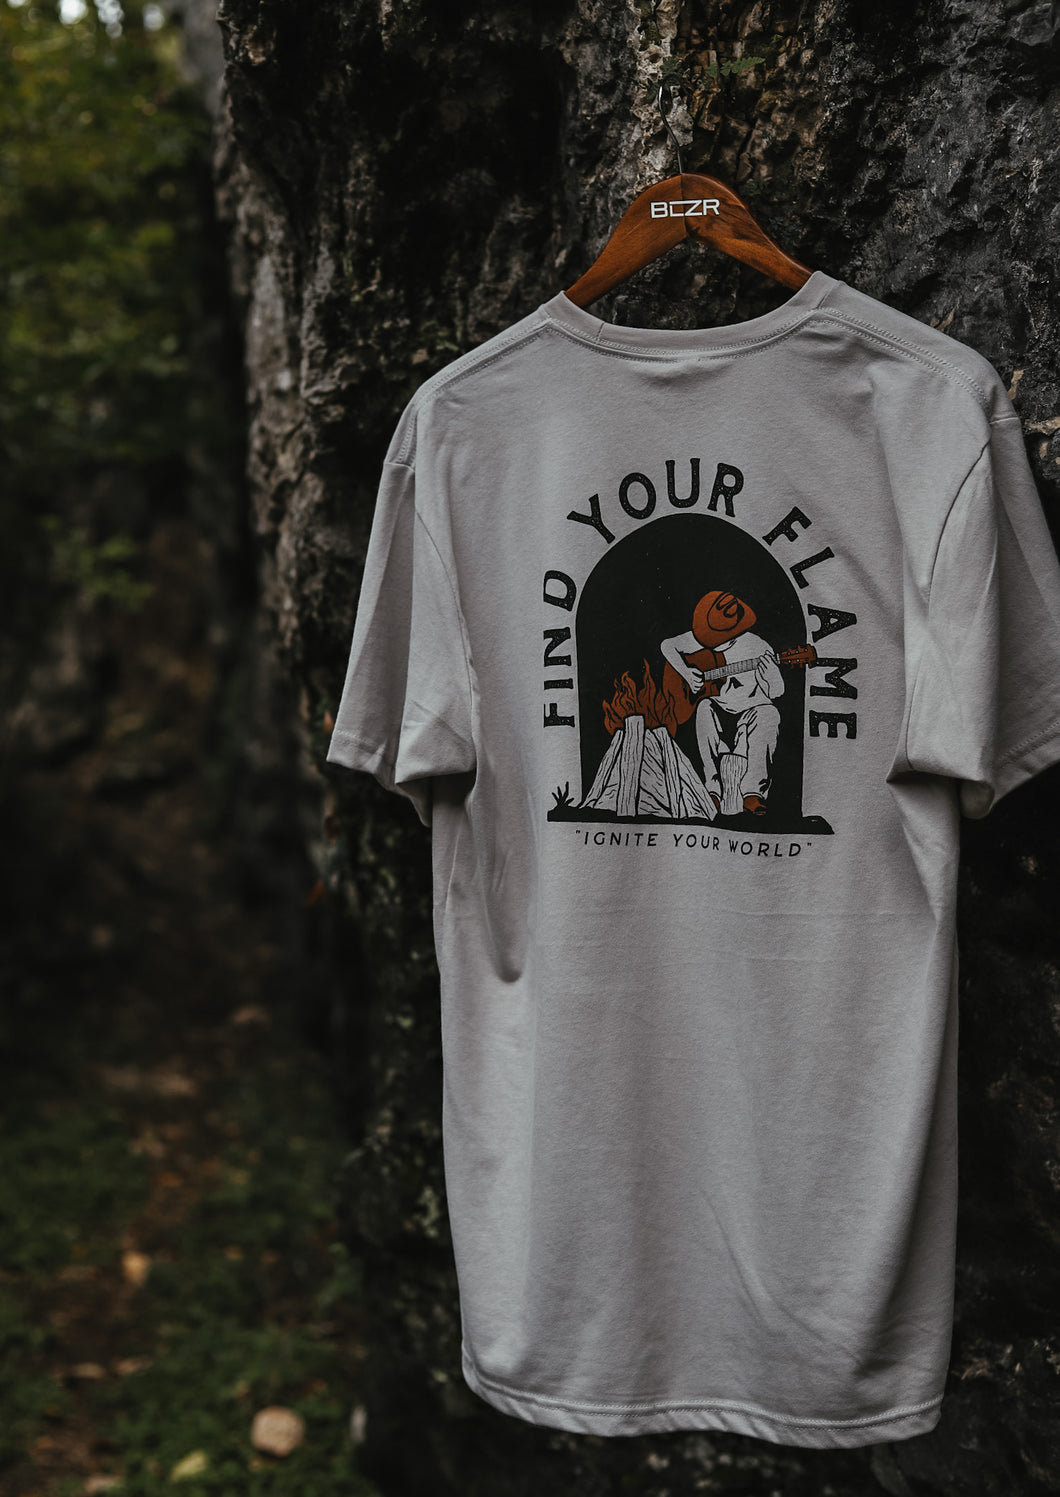 Find Your Flame Tee